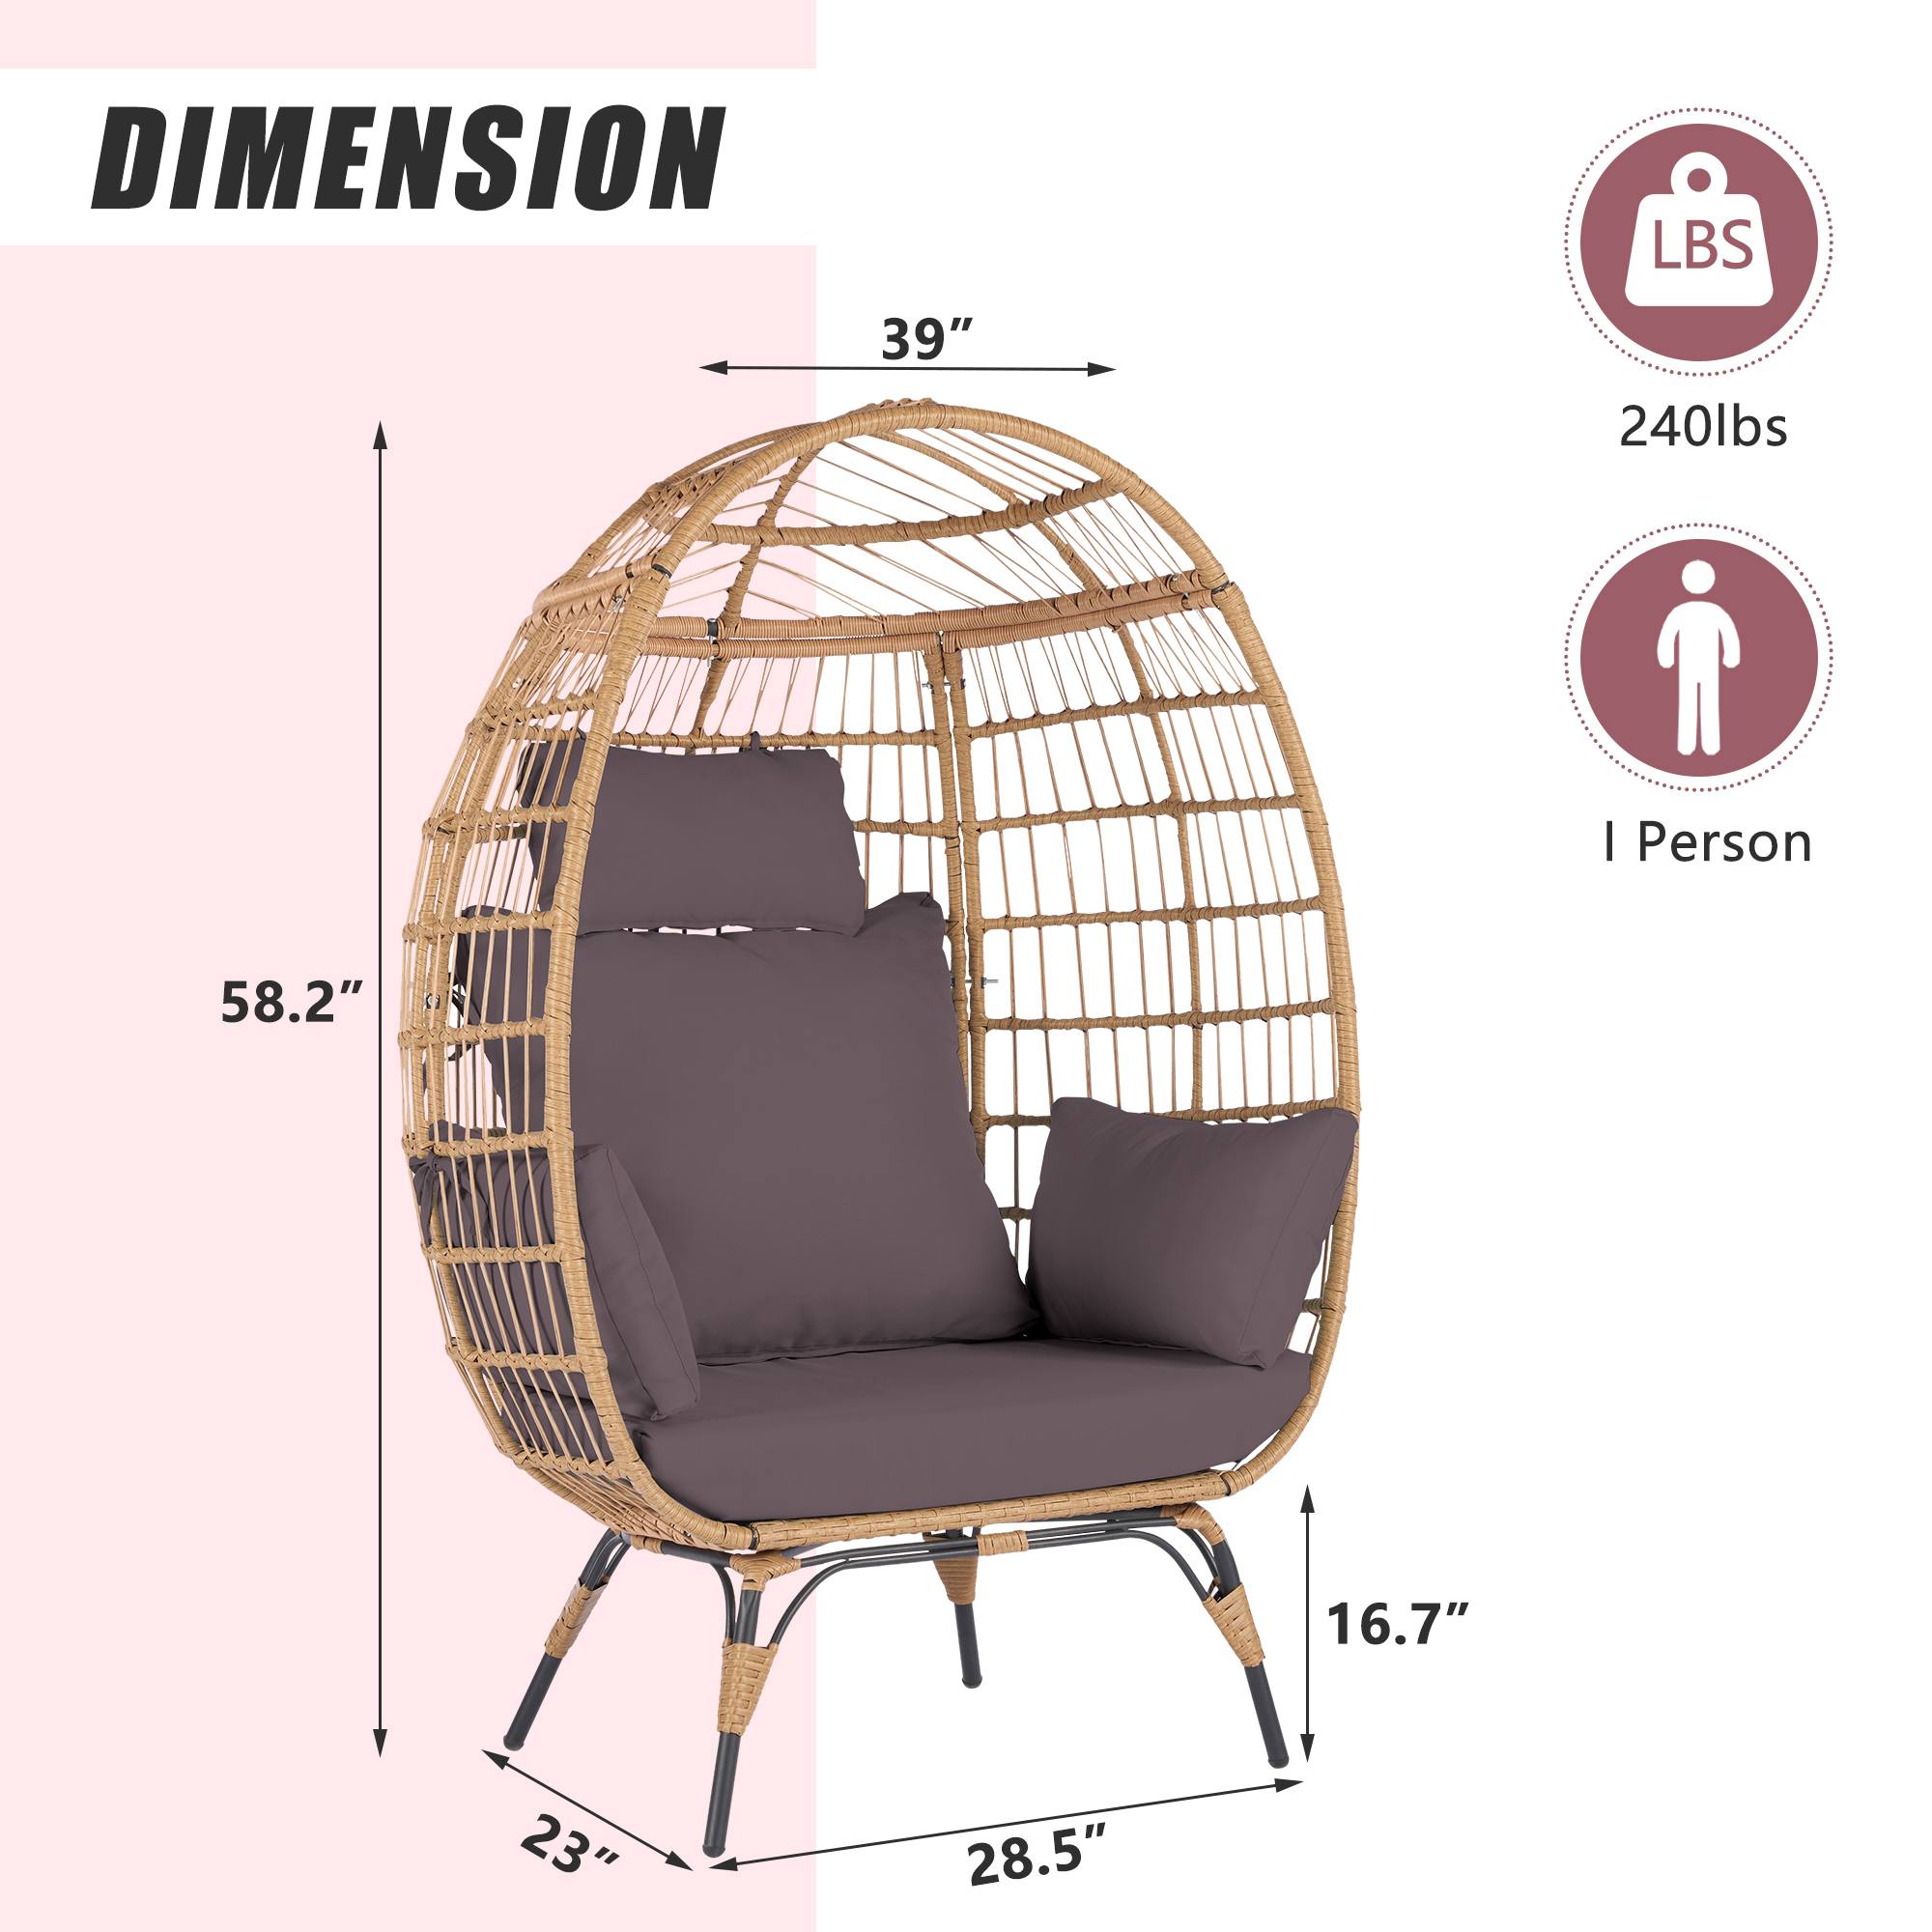 Outdoor Stationary Egg Chair, Wicker Egg Swing Chair with Dark Gray Cushions for Patio, Garden, Backyard, Rattan Standing Egg Chair - image 3 of 8